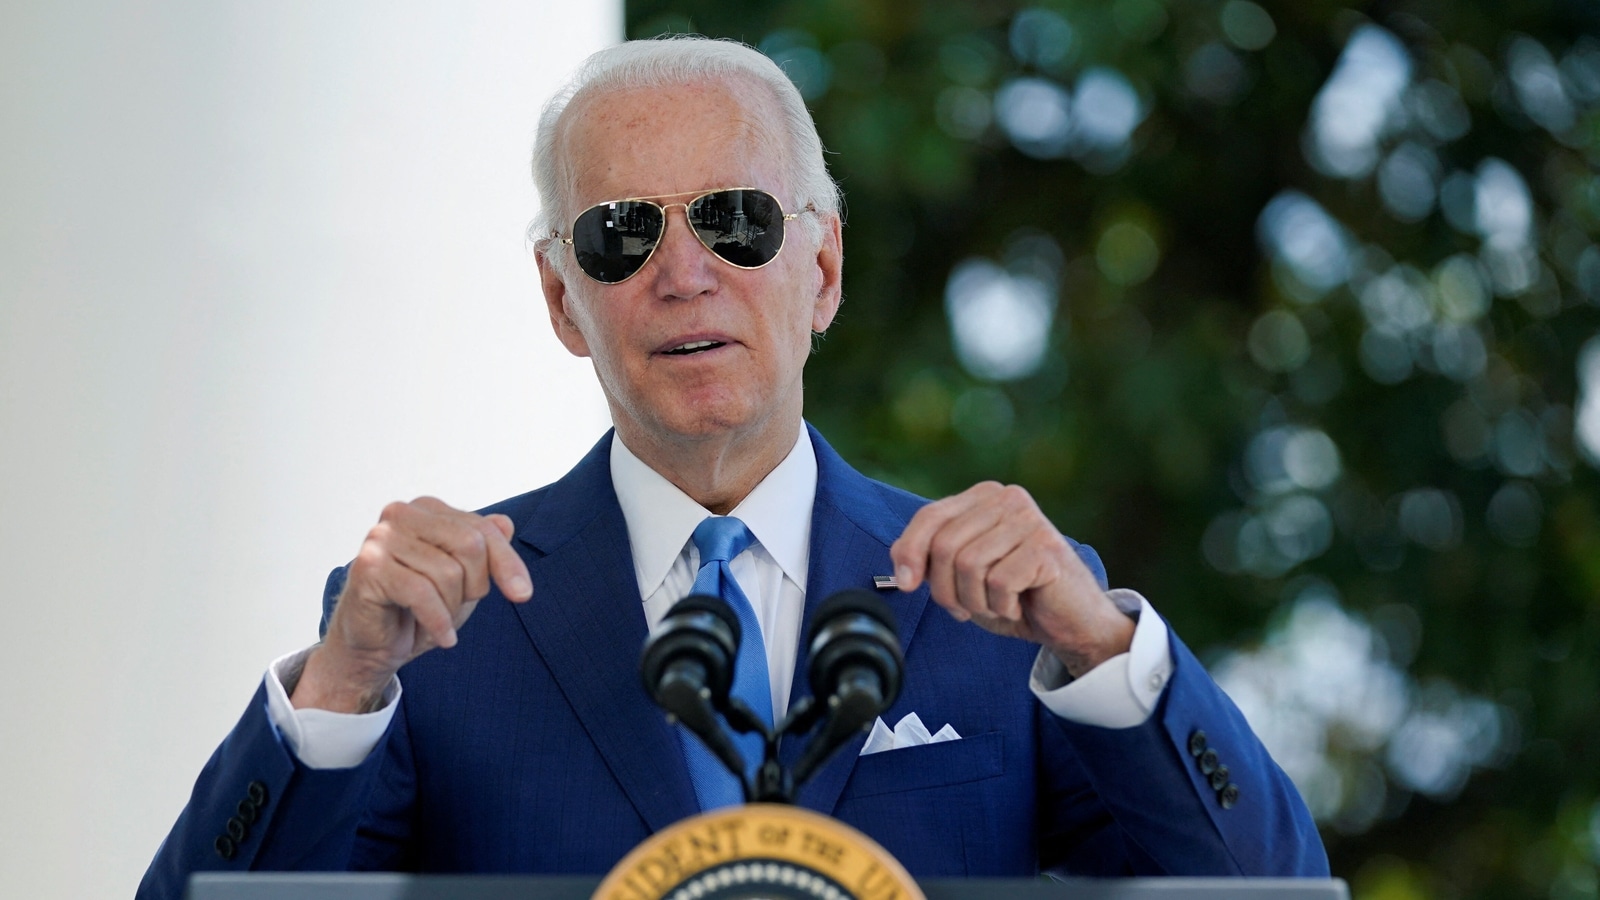 President Biden exams unfavorable after second bout of Covid-19